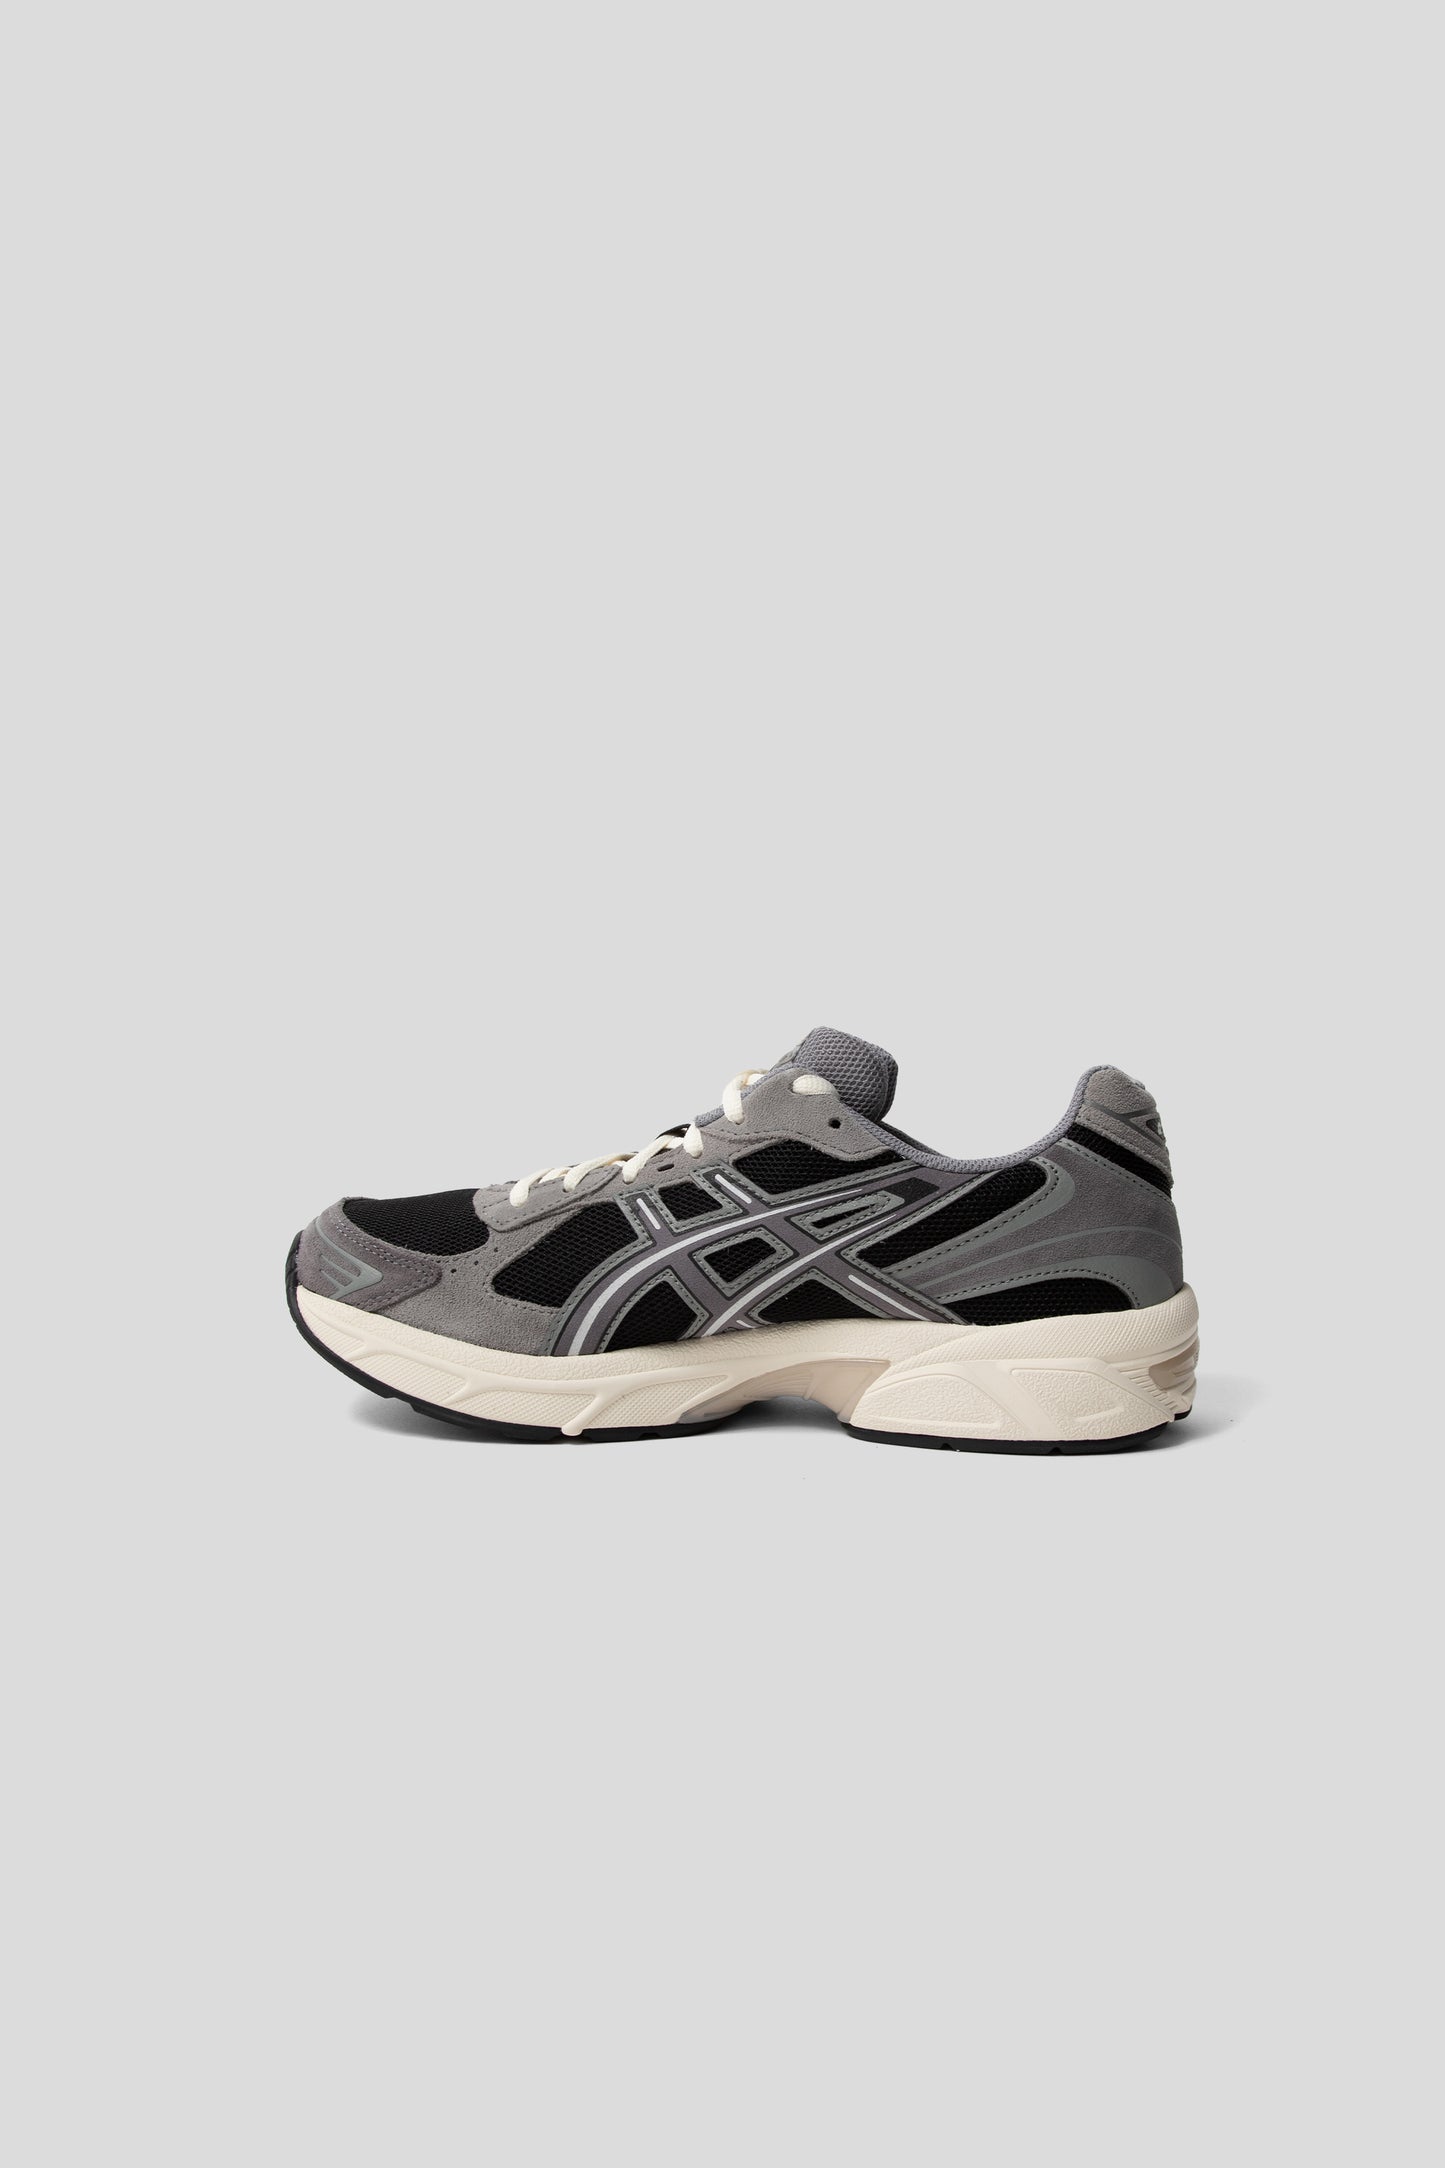 Asics Gel-1130 sneakers in Black and Carbon